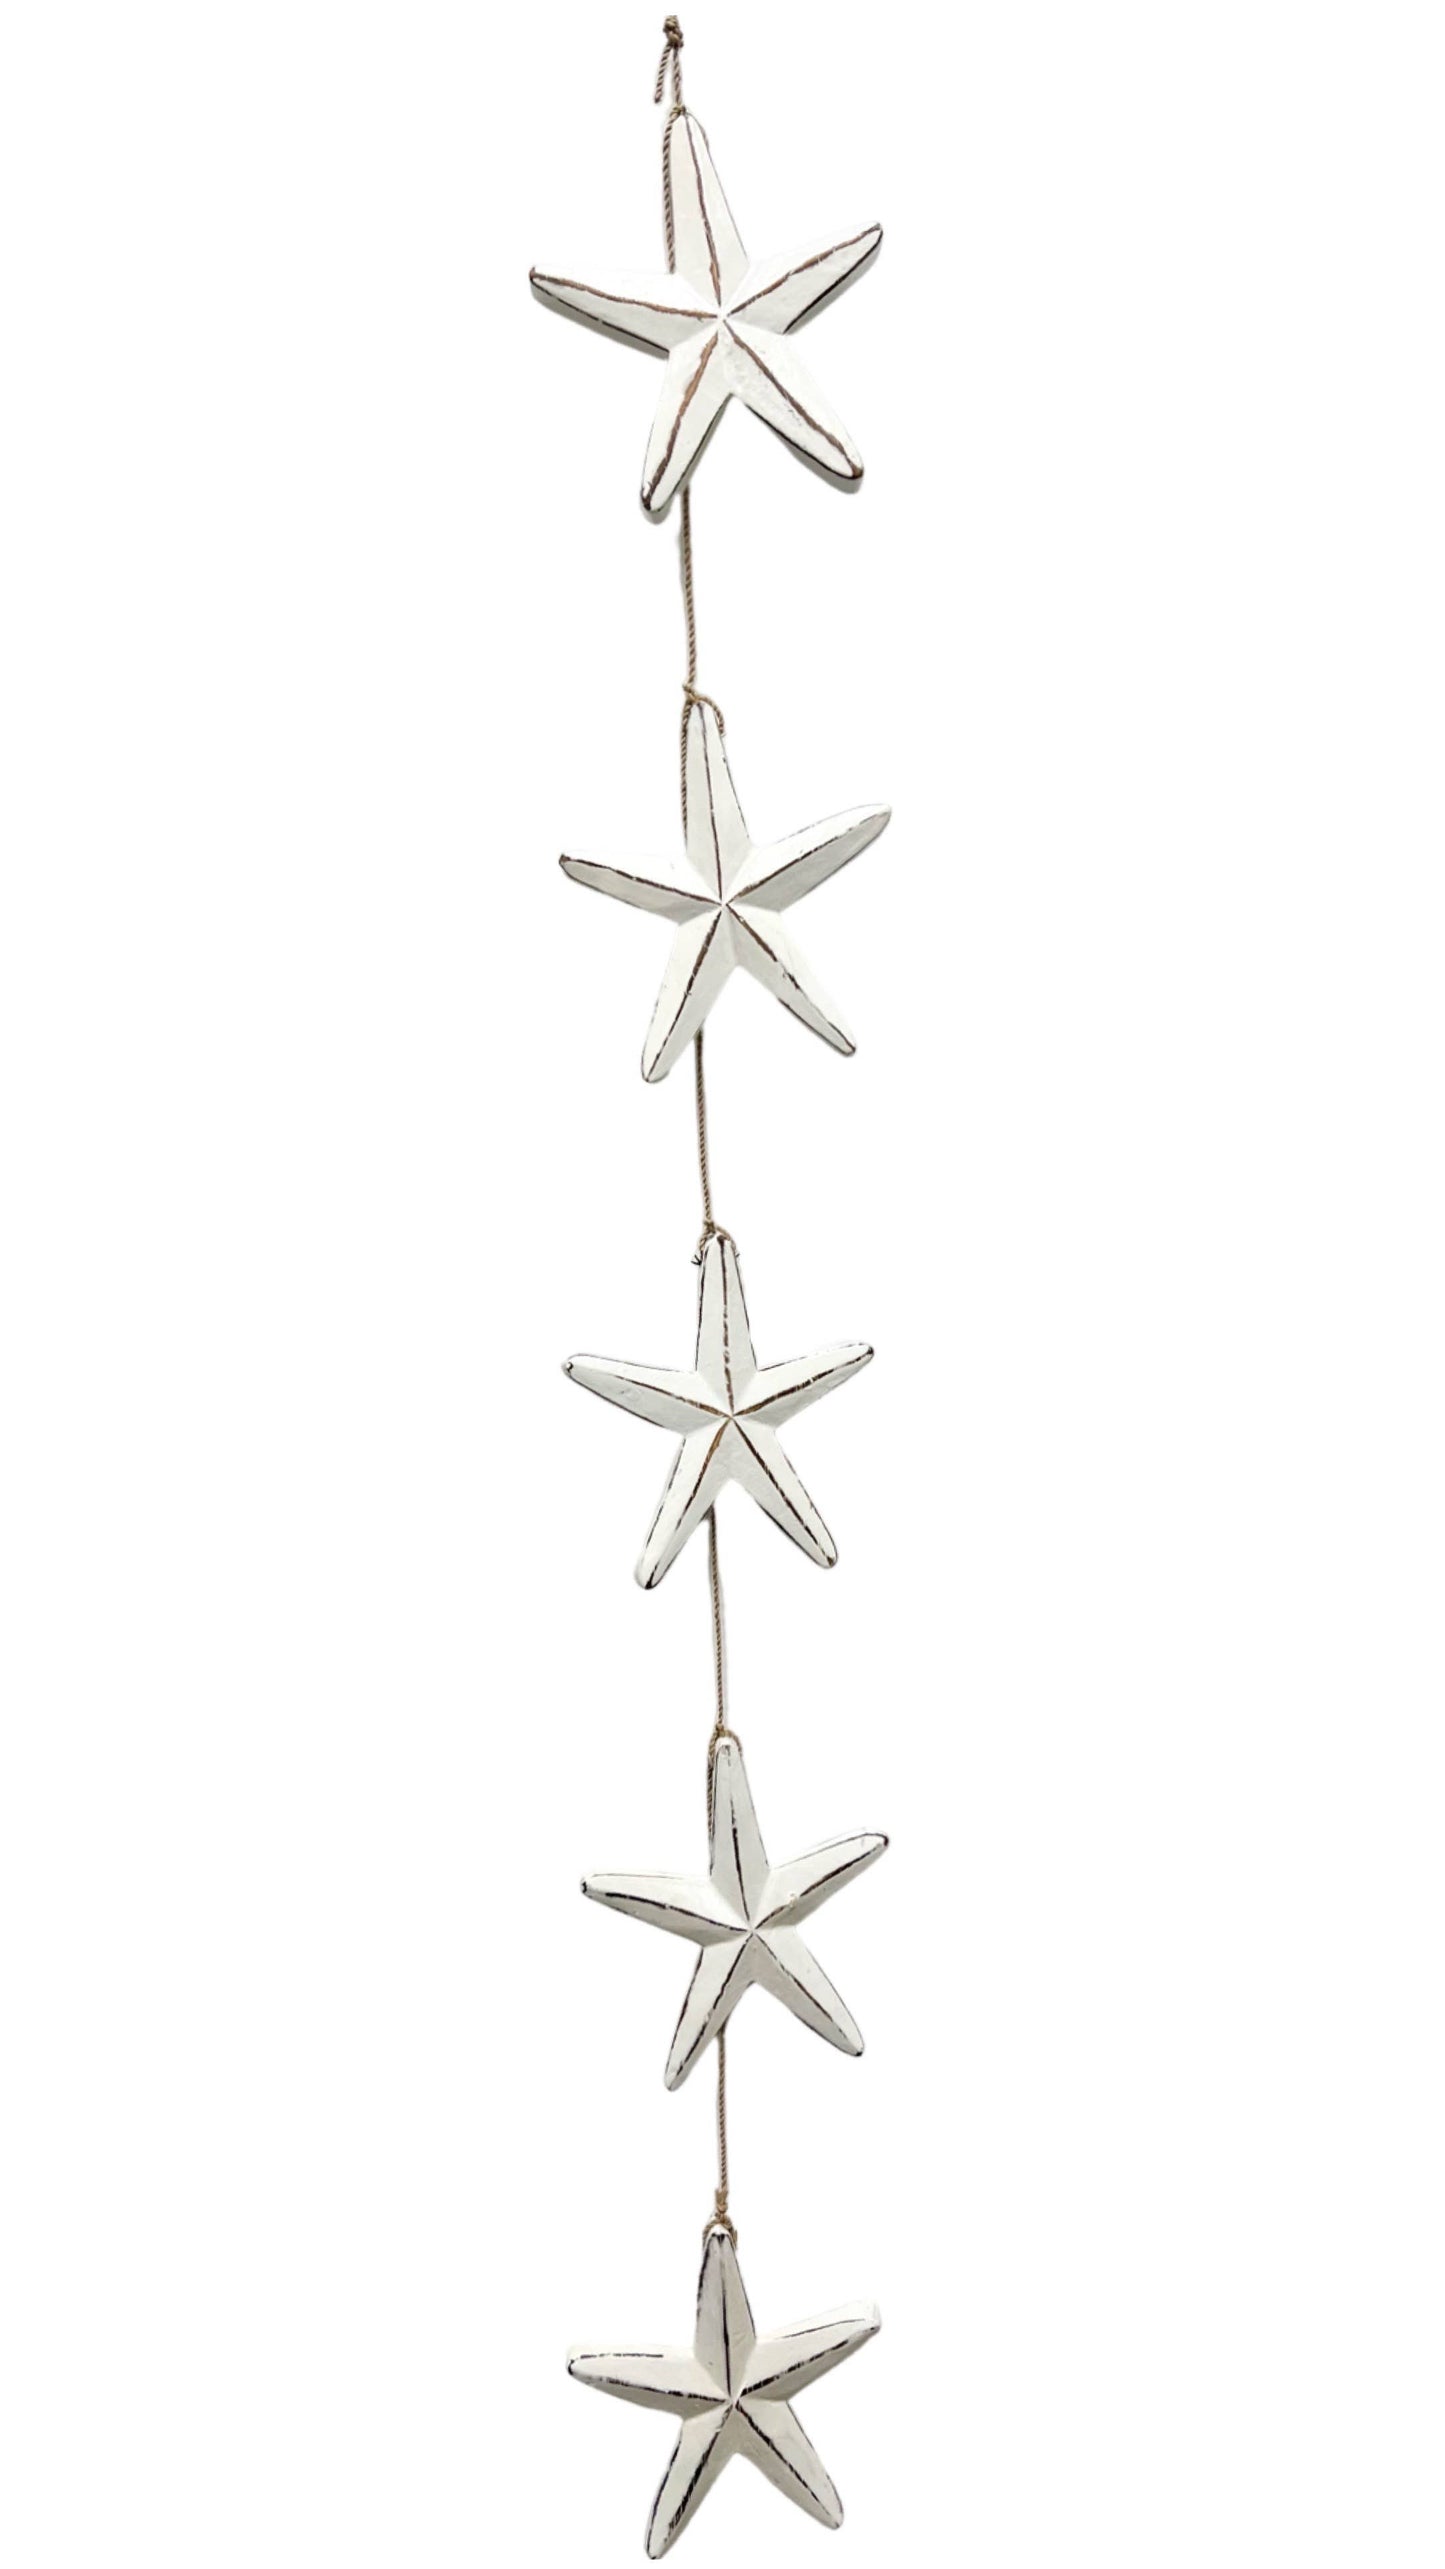 Bamboo Source Tropical Decor - 5 Star White Hanging Decoration - White